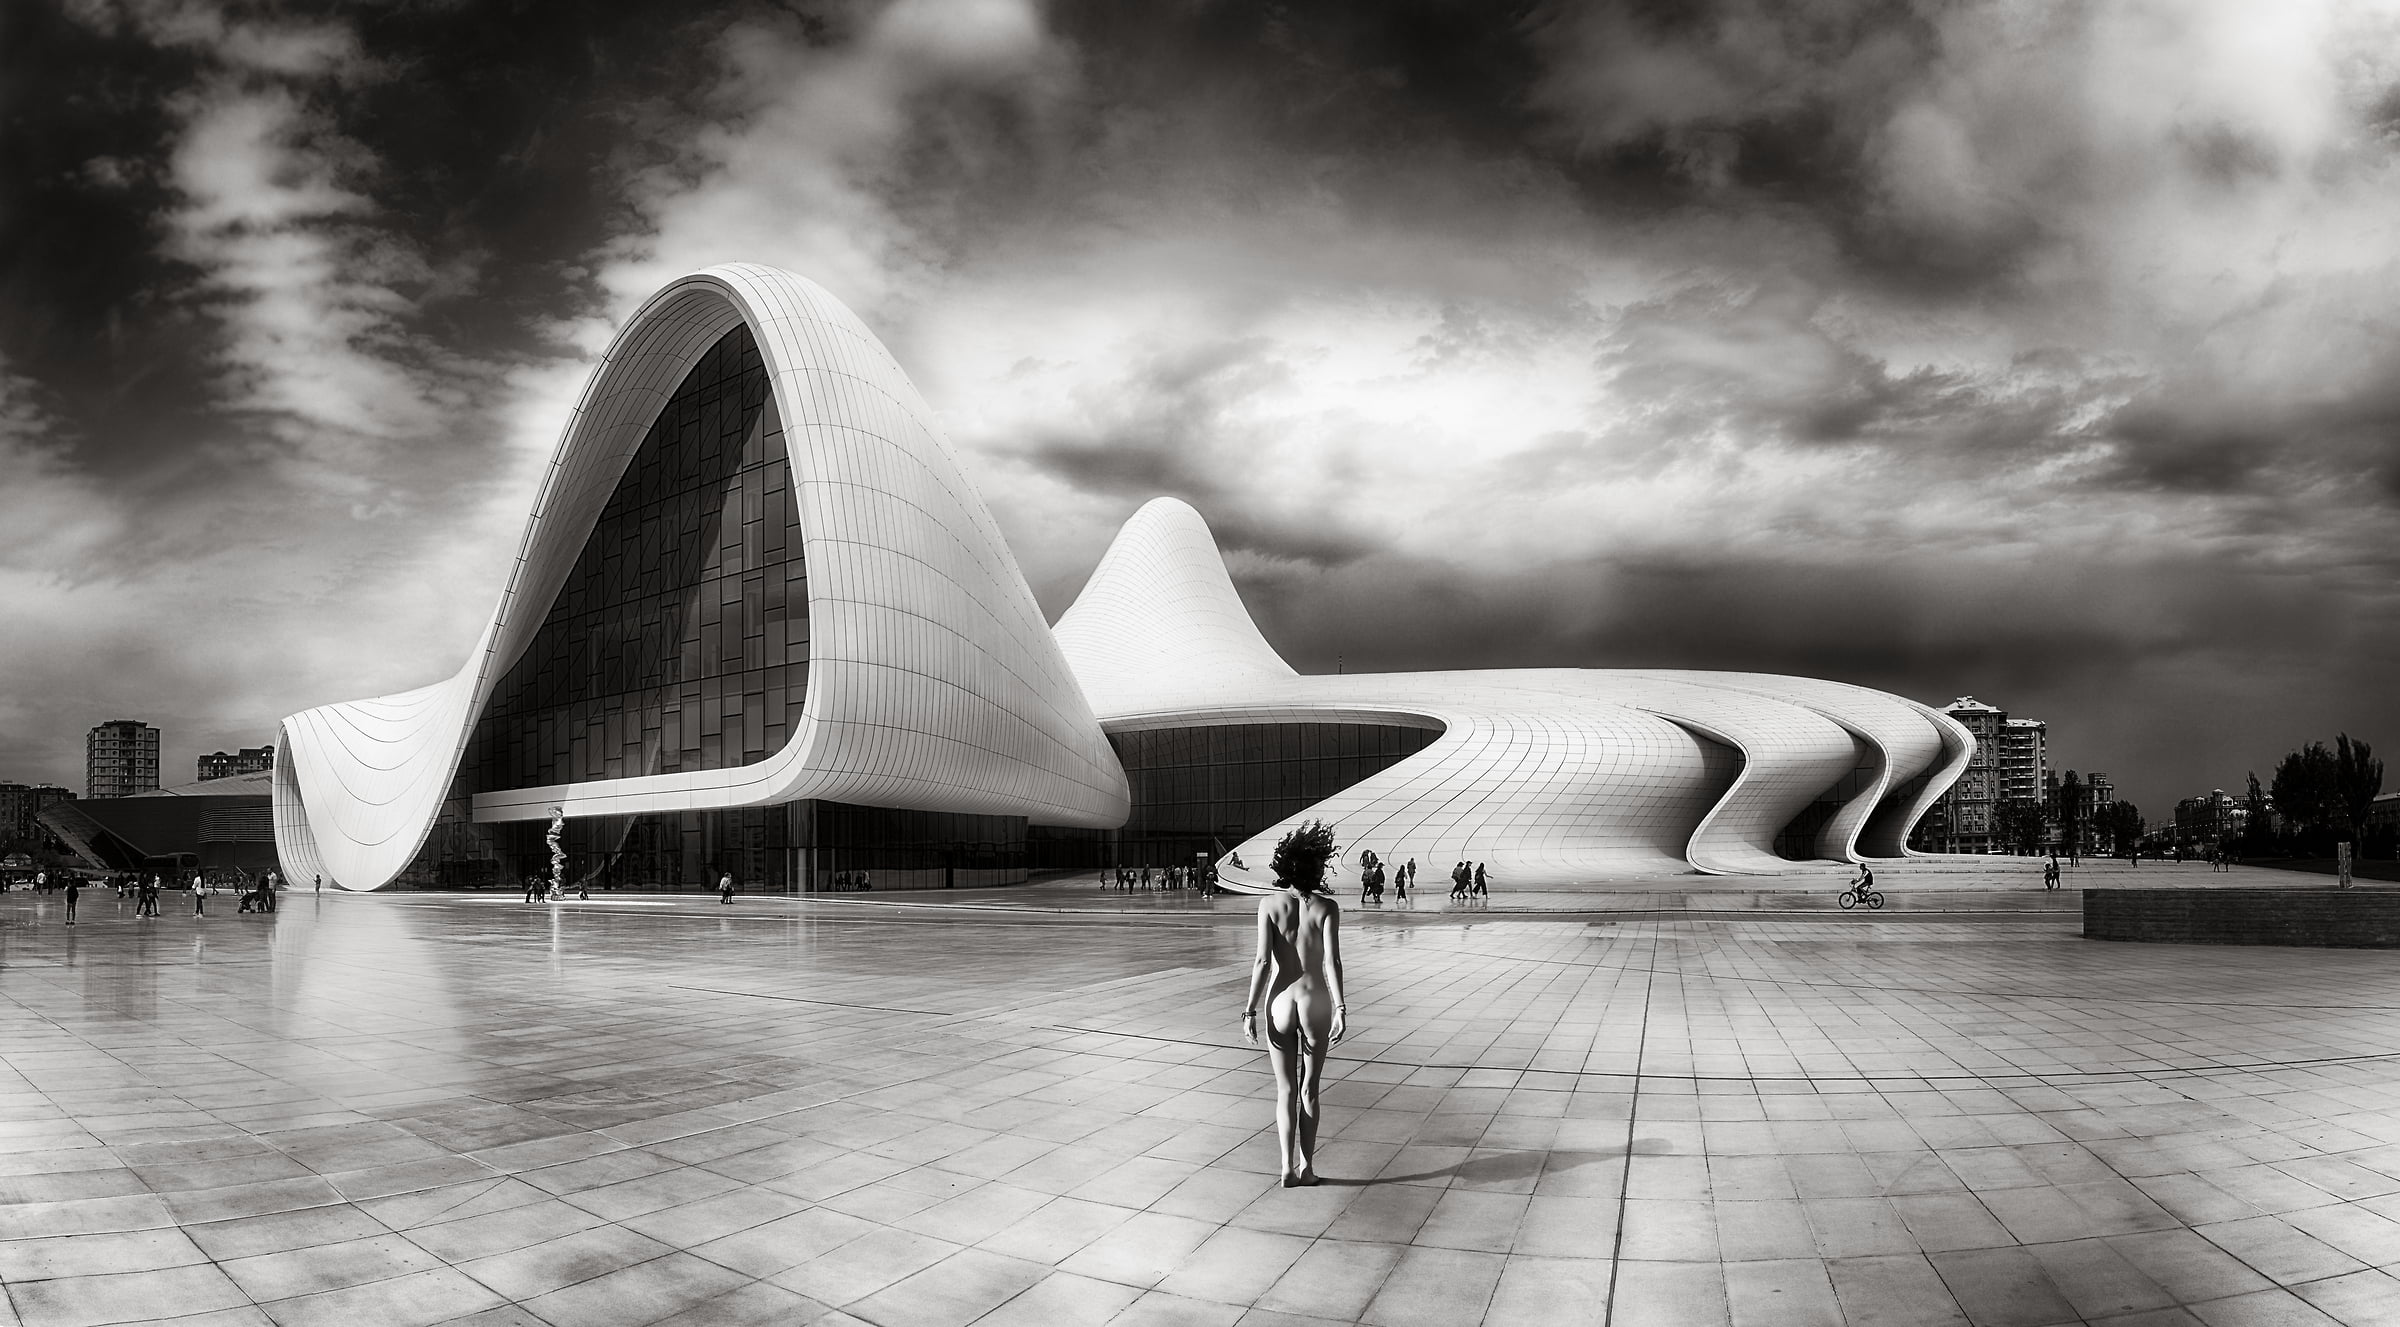 159 megapixels! A very high resolution, large-format VAST photo print of a nude woman in a plaza in front of a modern building; surreal, black & white nude photograph created by Peter Rodger in Heydar Aliyev Center, Baku, Azerbaijan